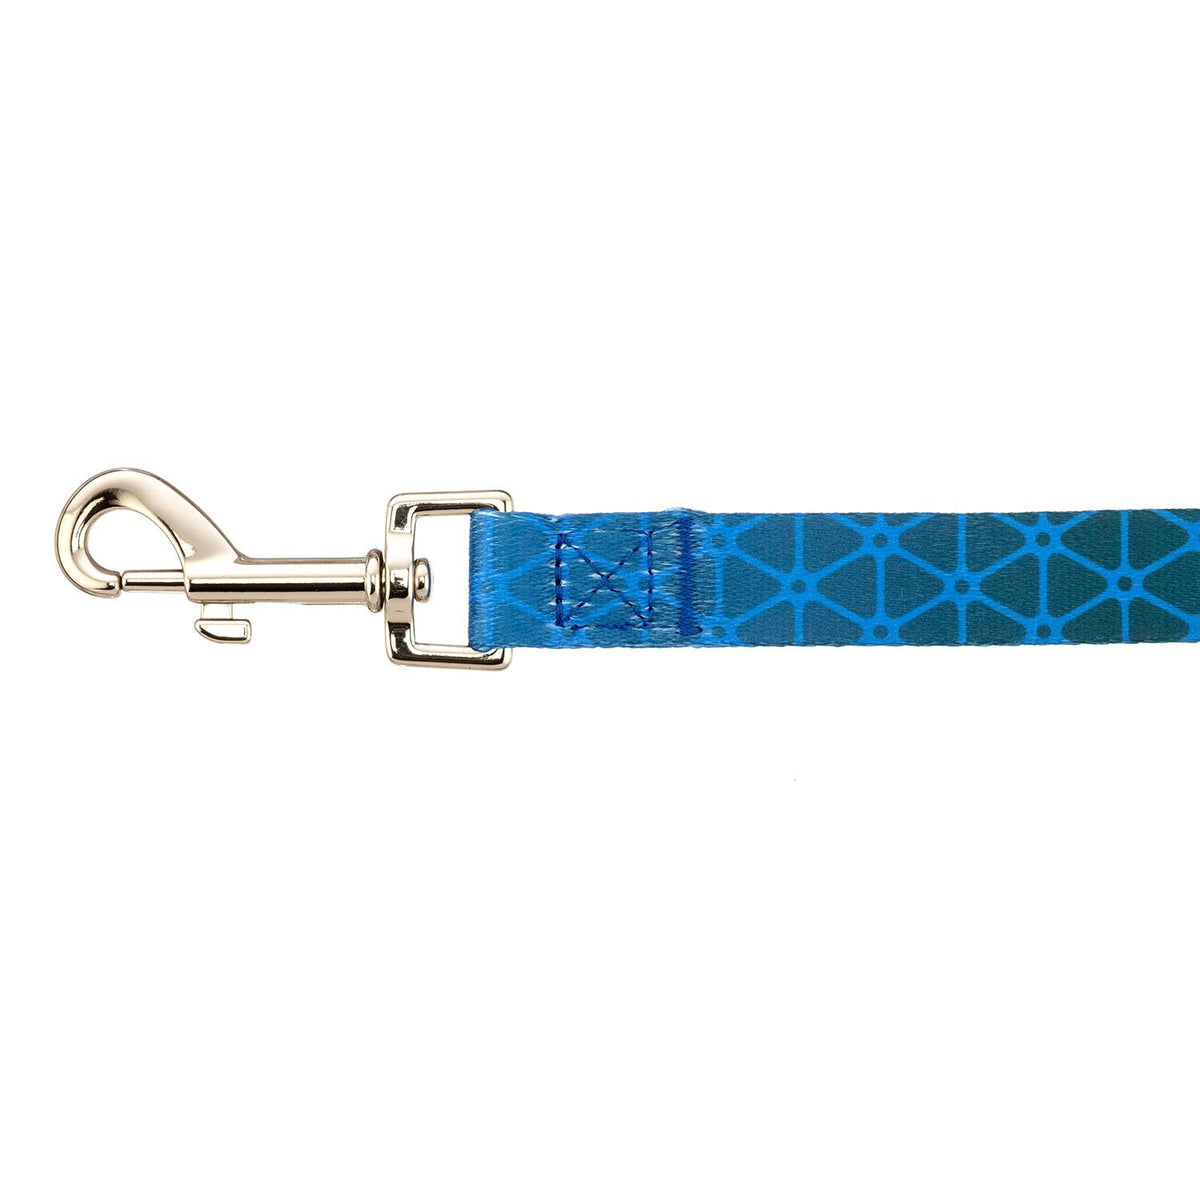 BRP Dog Leashes And Collar (Small Dogs)